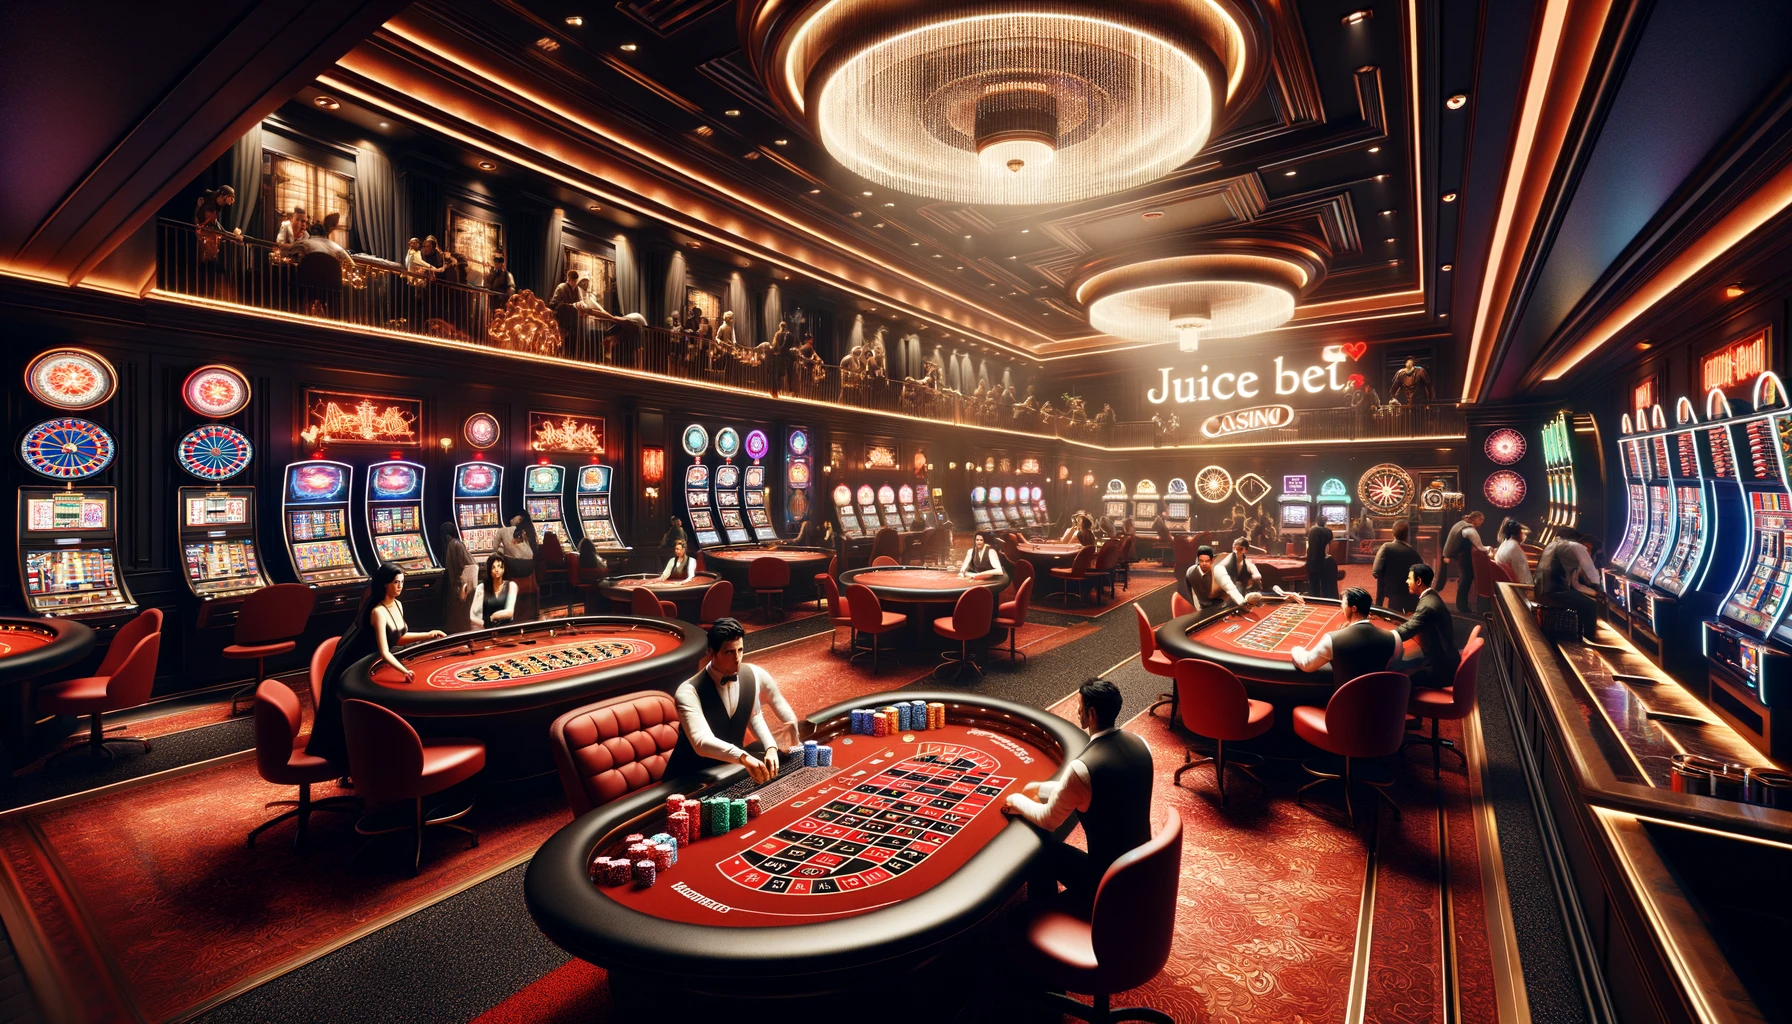 Get ready for excitement at Juicebet Casino: unleash thrilling games and wins! 2